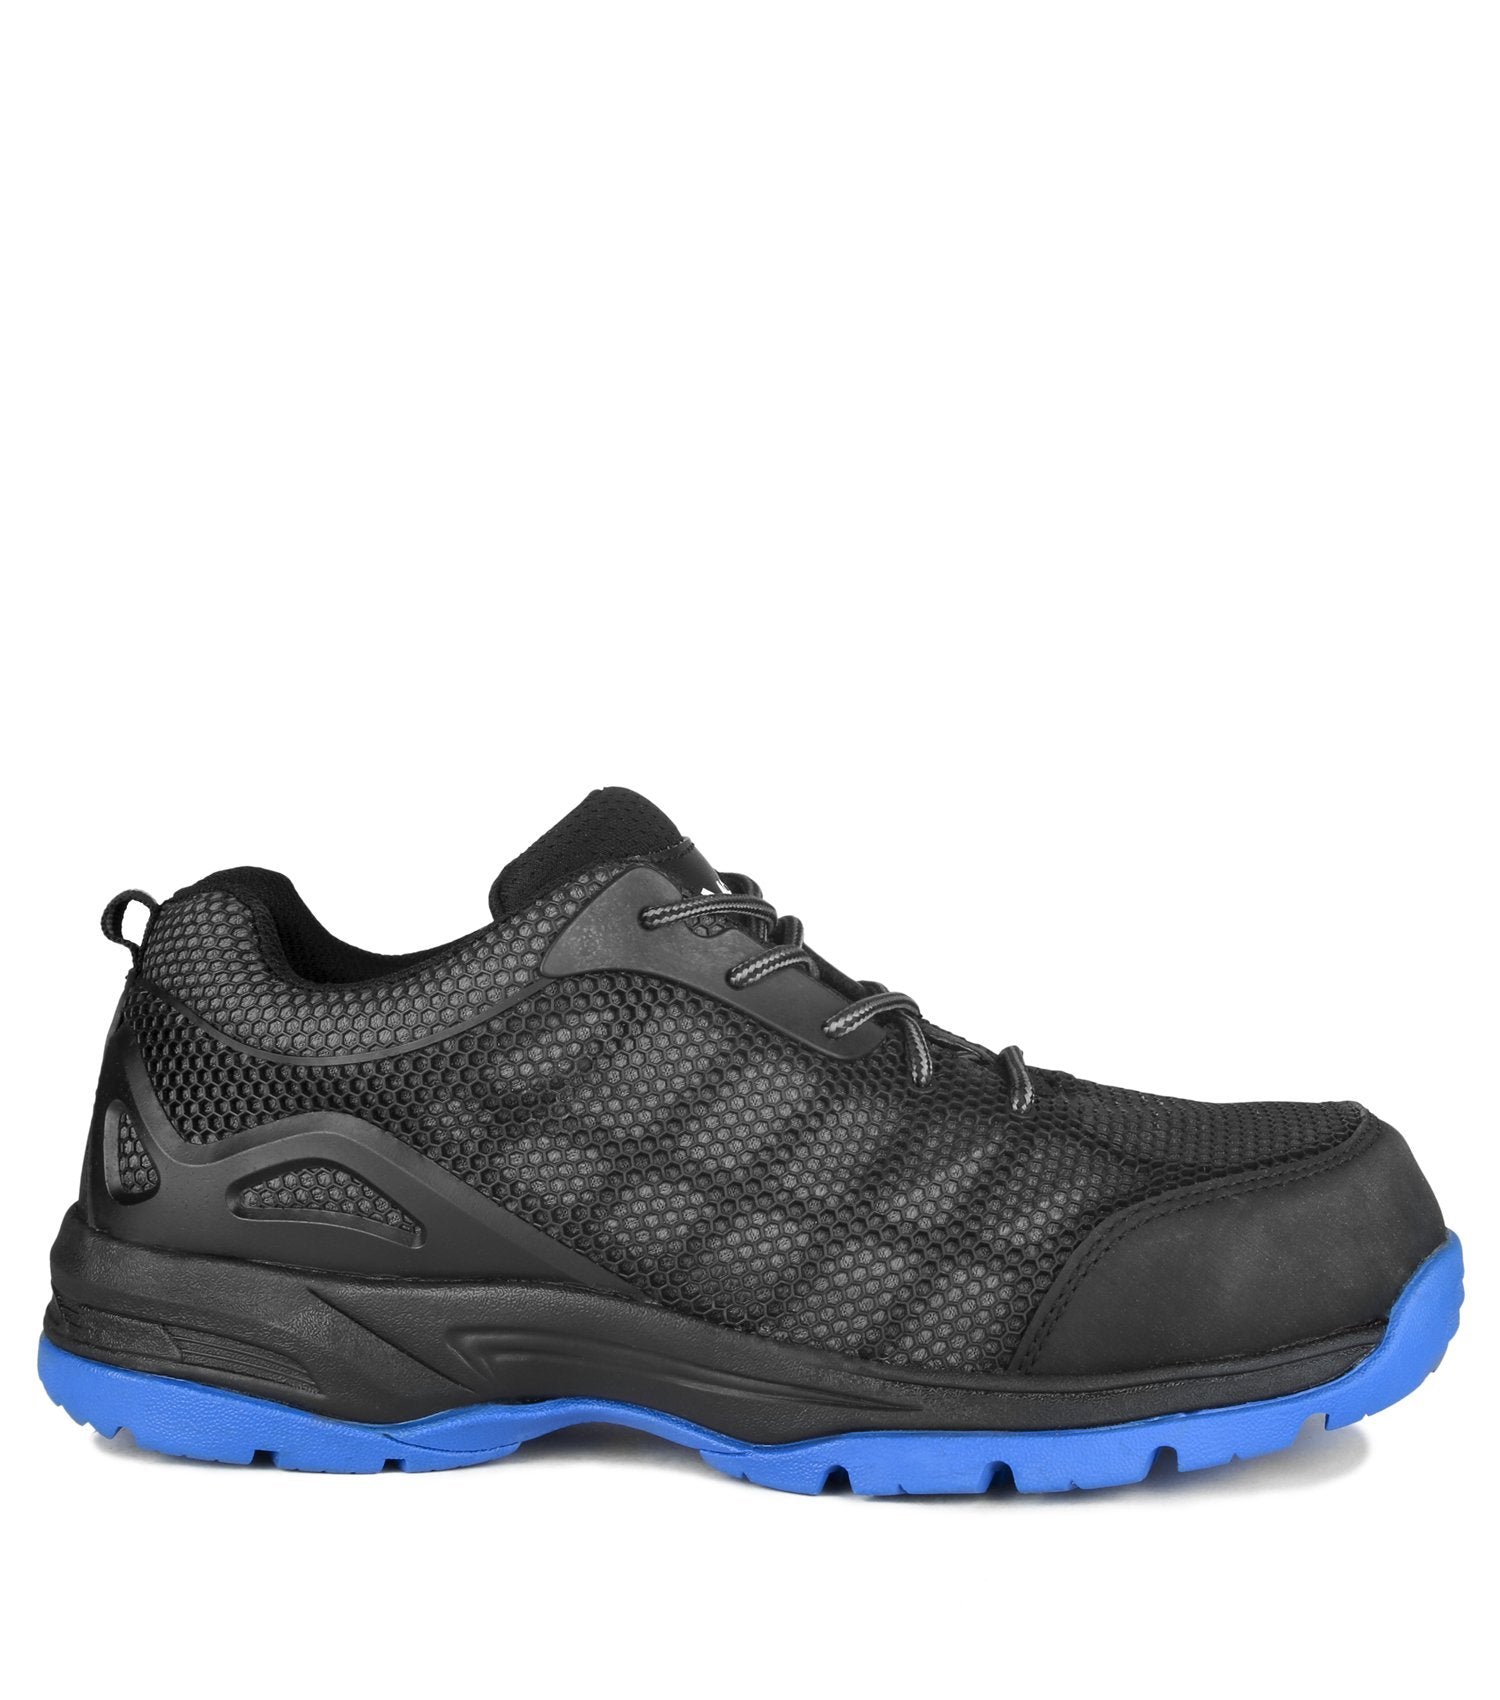 Acton Profusion Indoor Safety Work Shoes | Blue Tinted | Sizes 7-15 Work Boots - Cleanflow